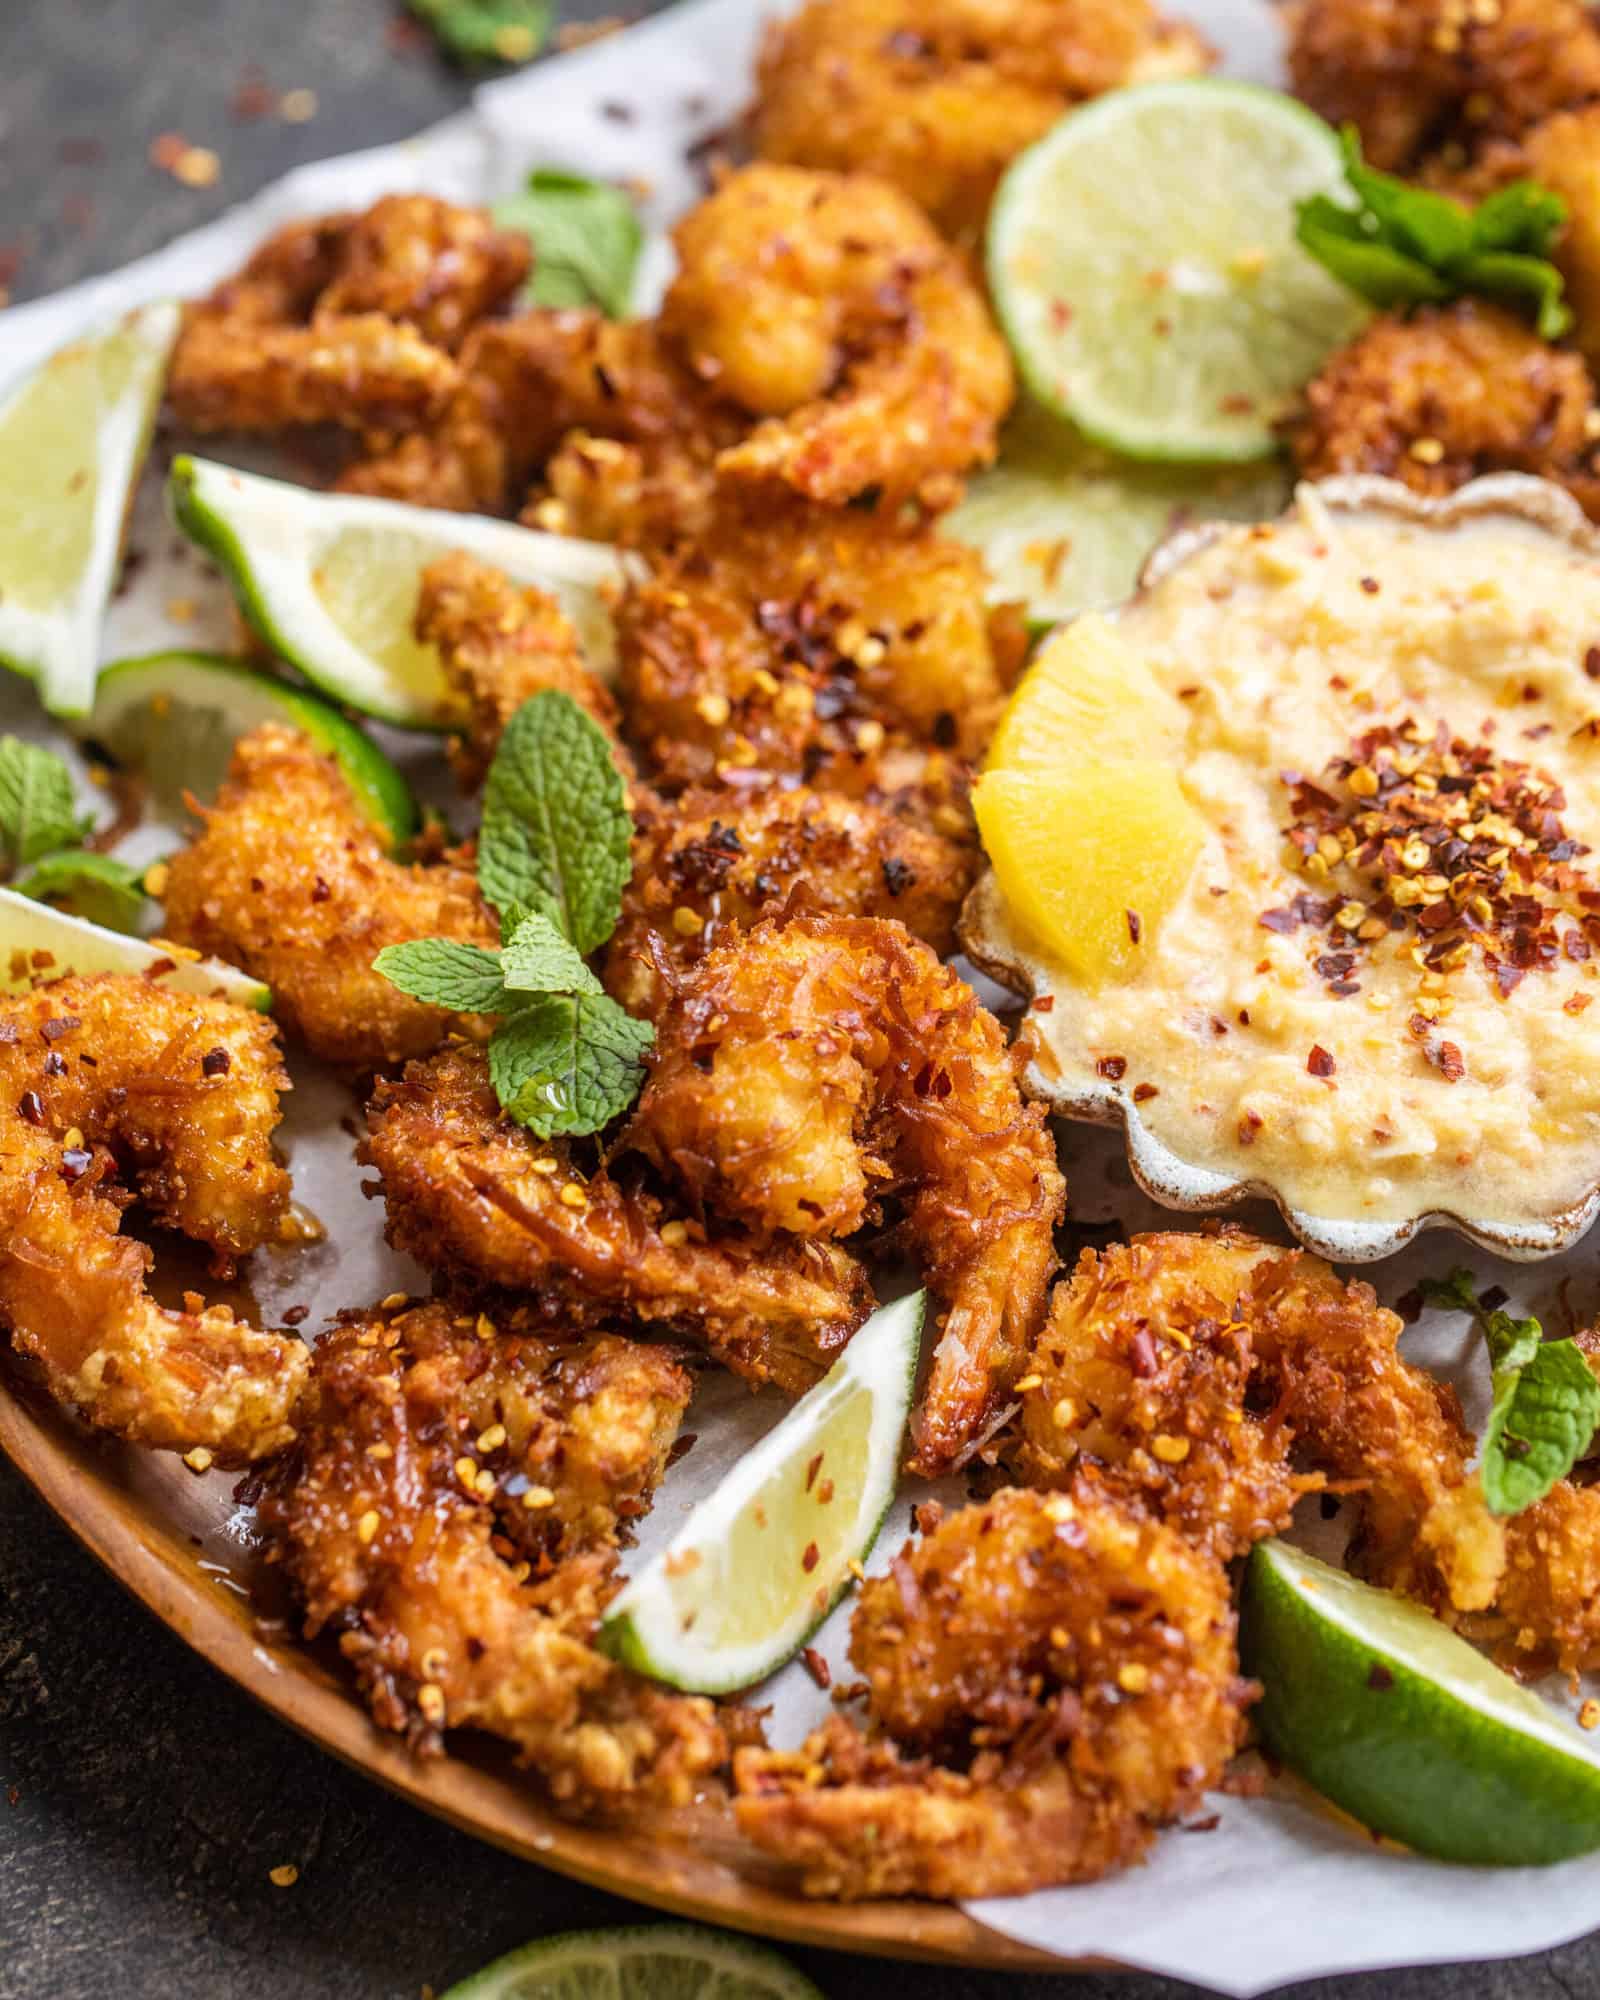 crispy golden fried shrimp on a wooden plate with fresh mint and sliced limes